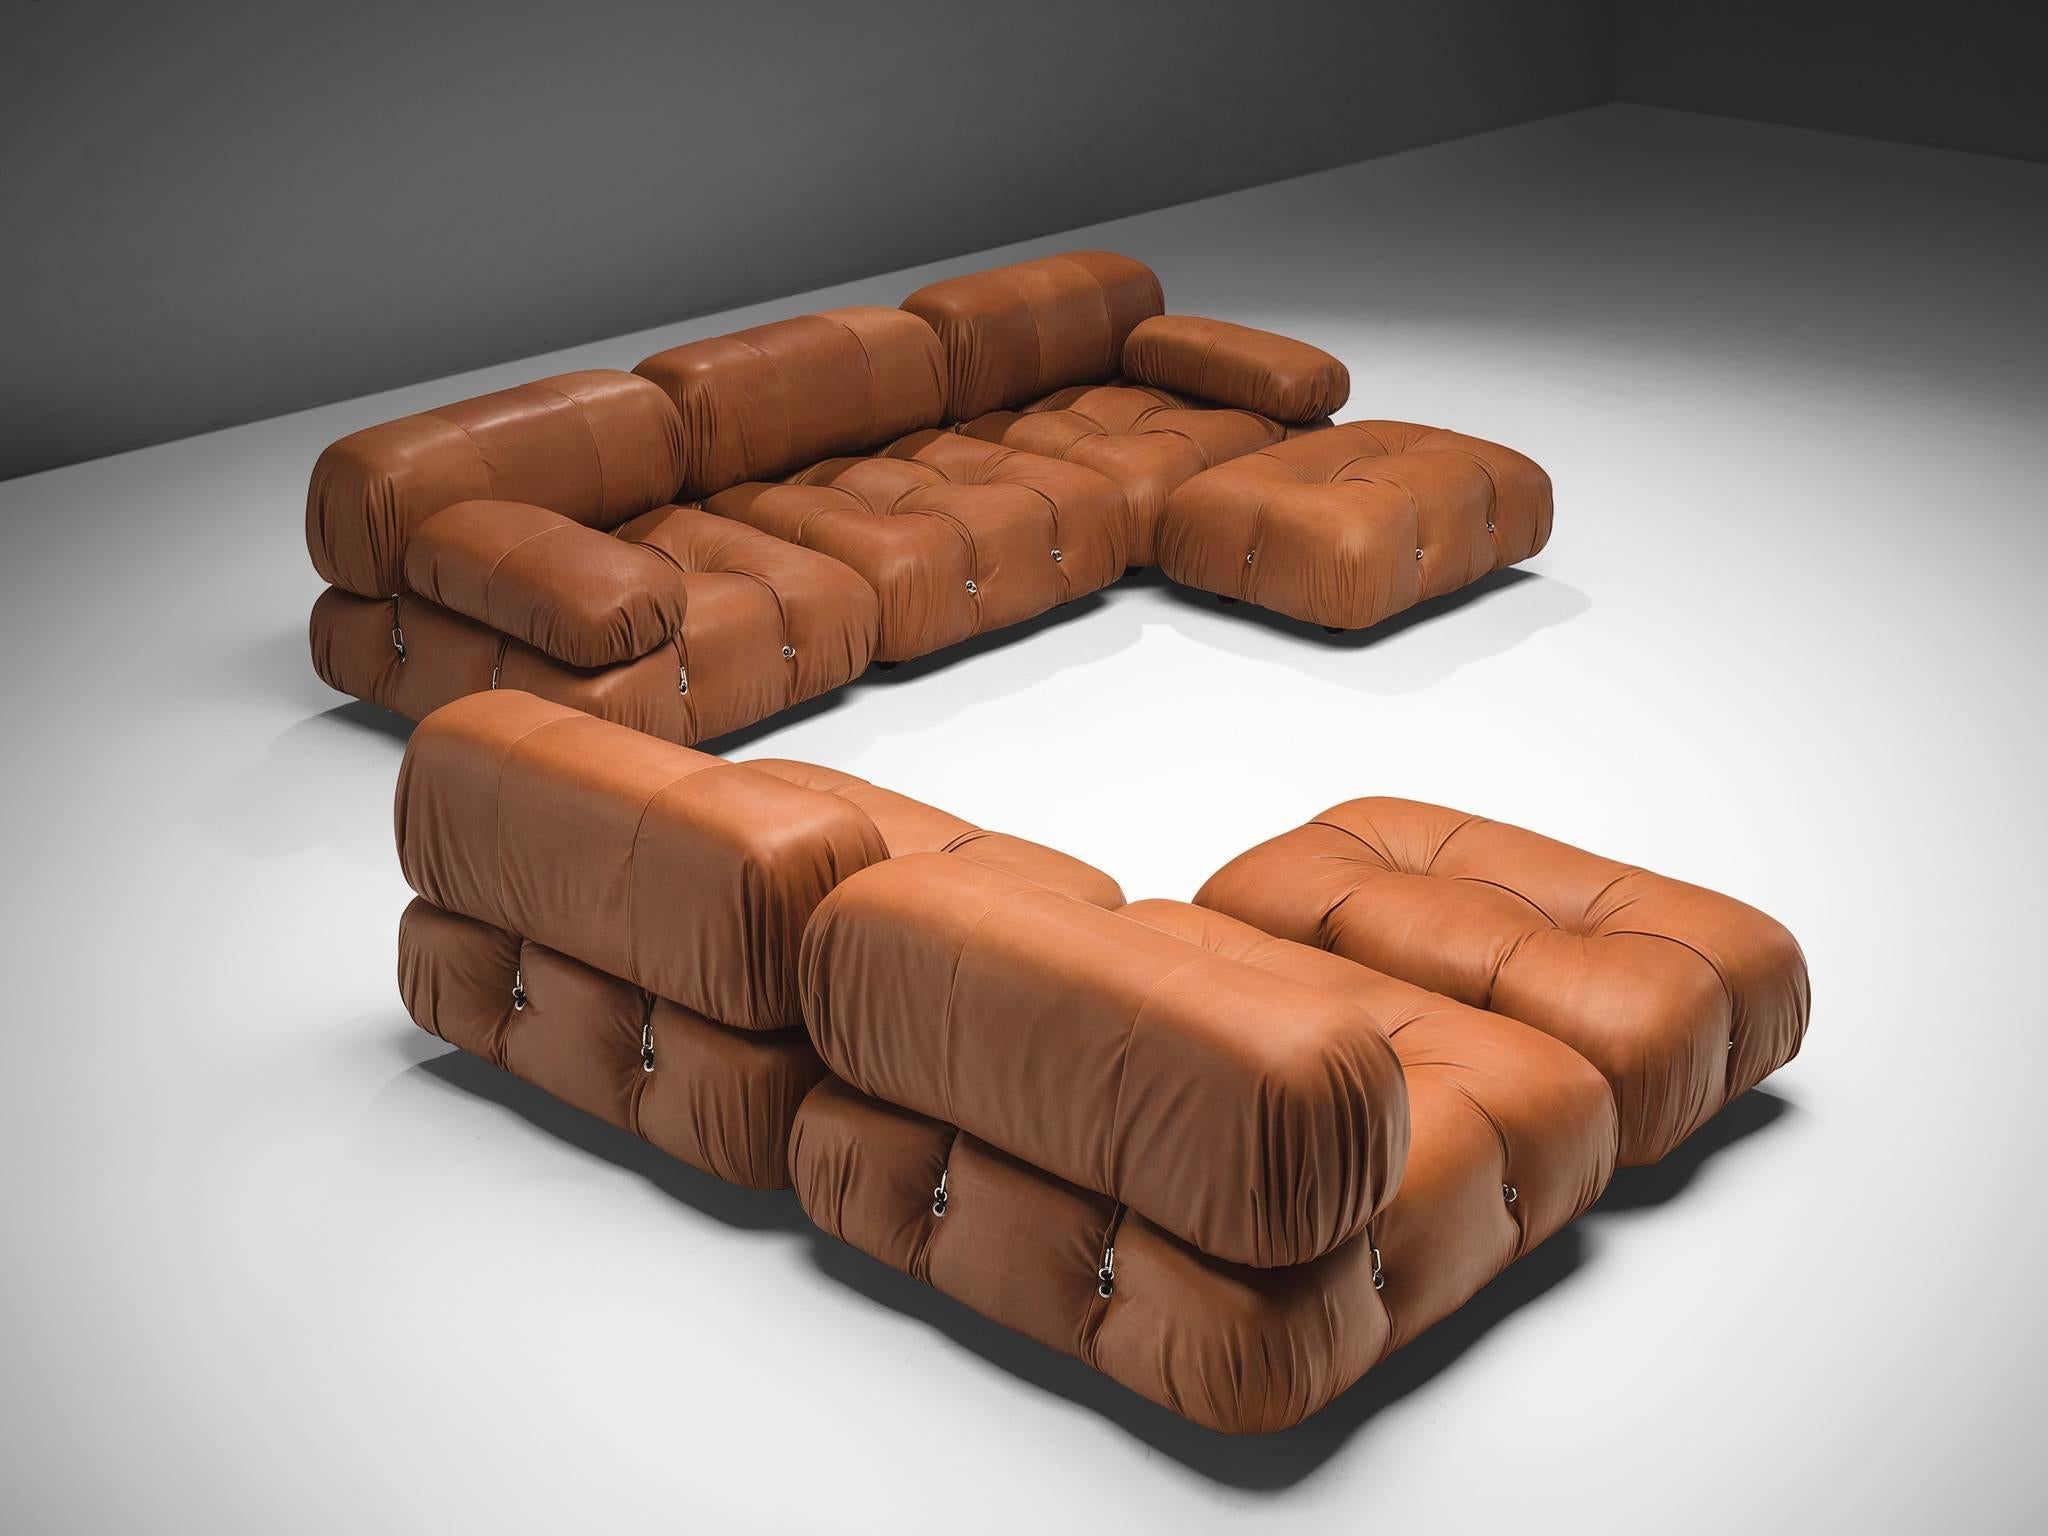 Mario Bellini, large modular 'Cameleonda' sofa, brown leather upholstery, Italy, 1971, reupholstered by our in-house upholstery atelier. 

The sectional elements of this sofa were made to be used freely and apart from one another. This sofa is part